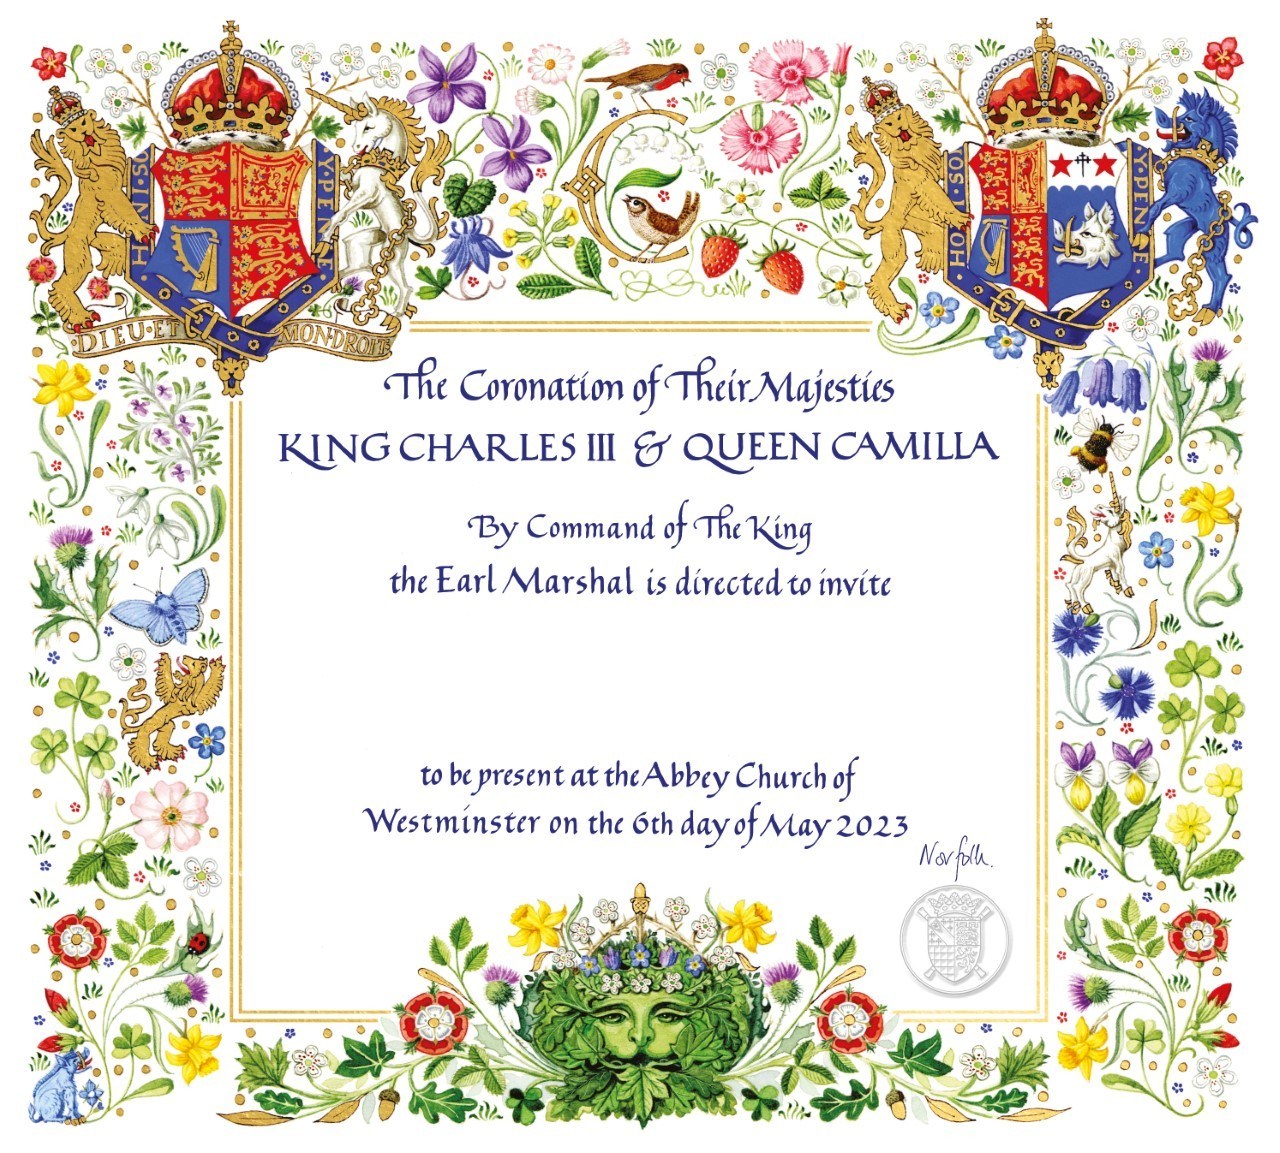 Buckingham Palace of the invitation to the May 6 Coronation of King Charles III, which will be issued in due course to over 2,000 guests who will form the congregation in Westminster Abbey.